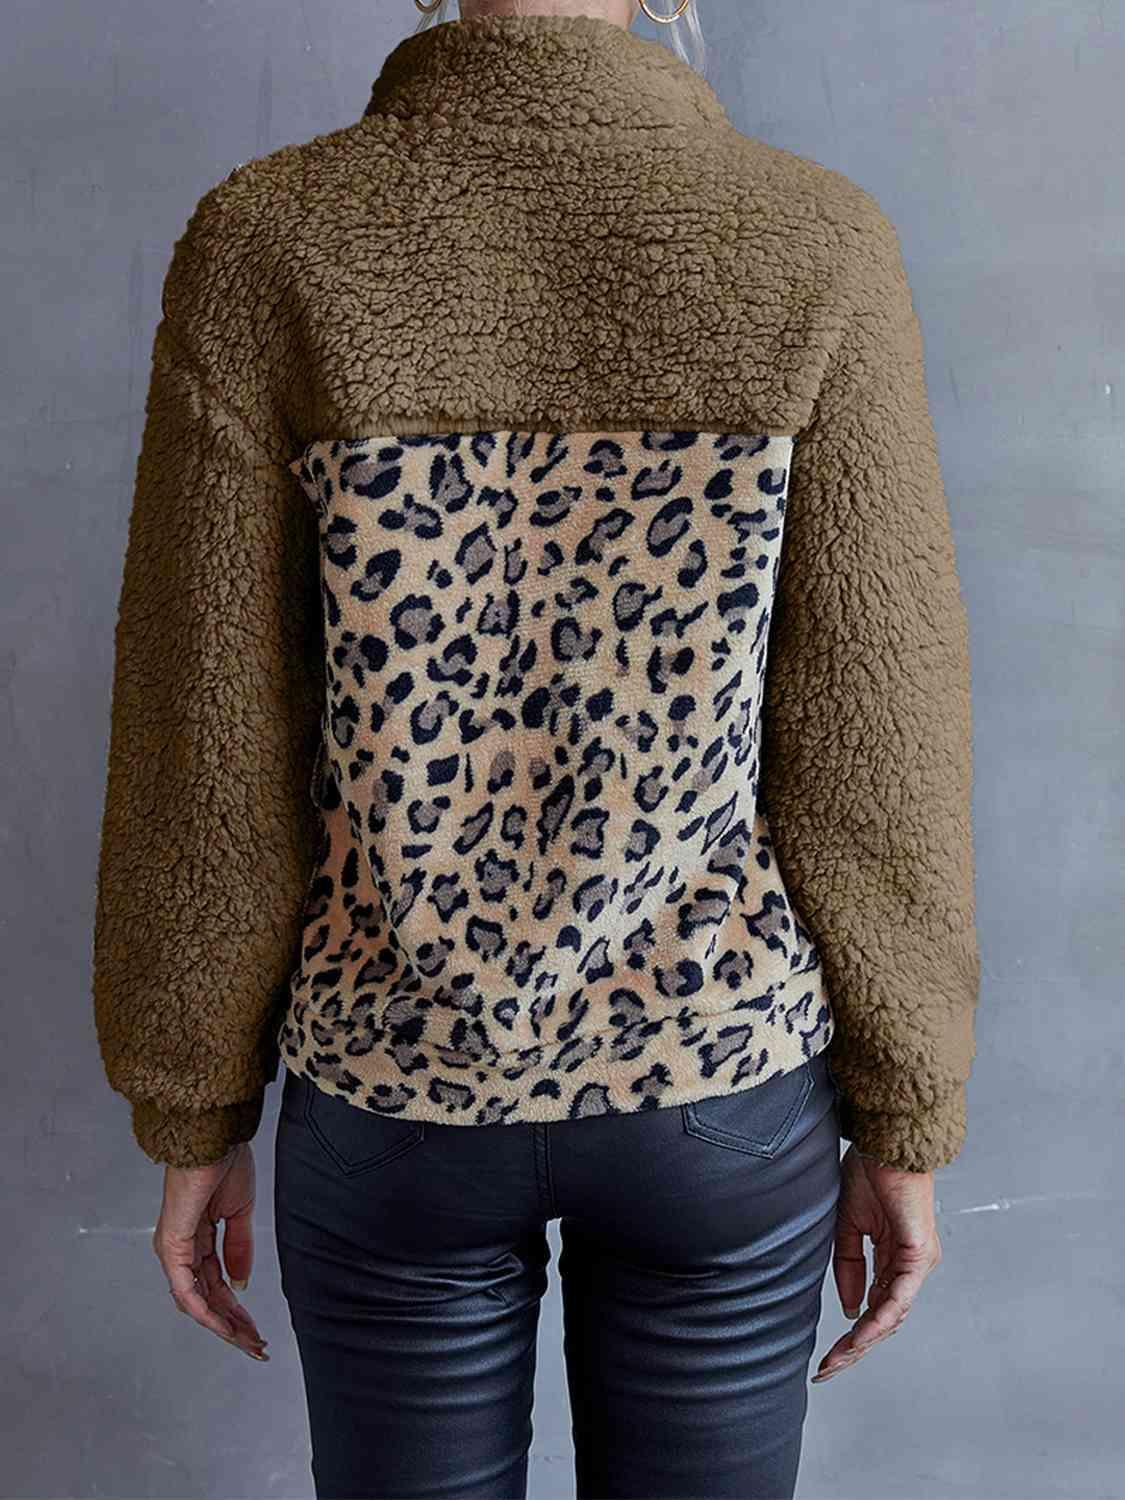 a woman wearing a jacket with a leopard print on it